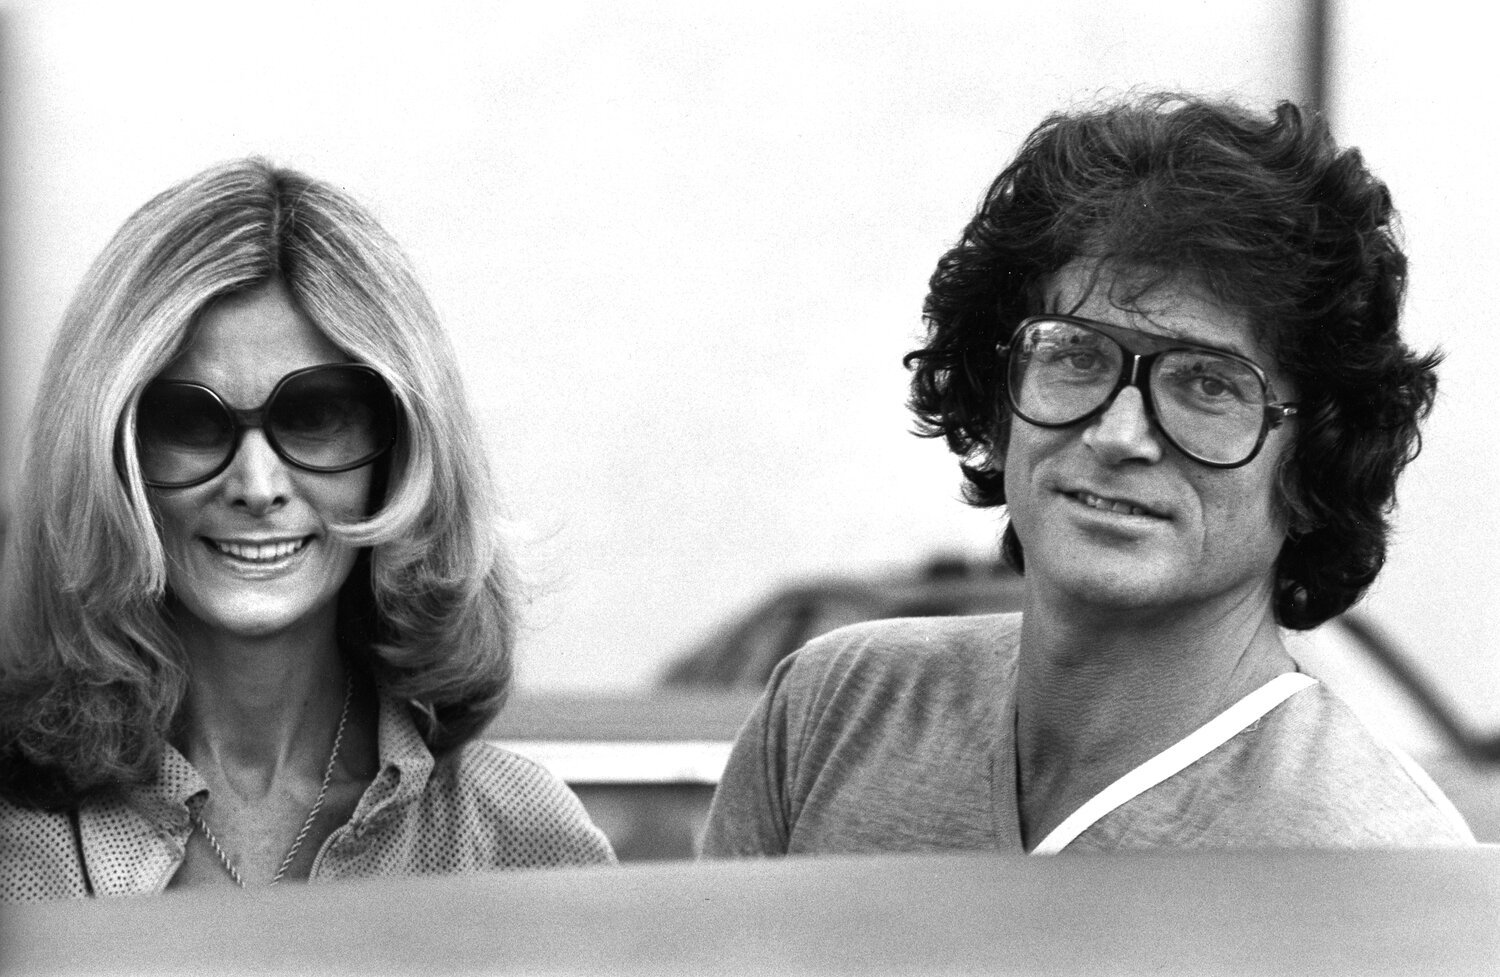 Michael Landon and wife Lynn Noe sighted on February 9, 1979 on Rodeo Drive in Beverly Hills